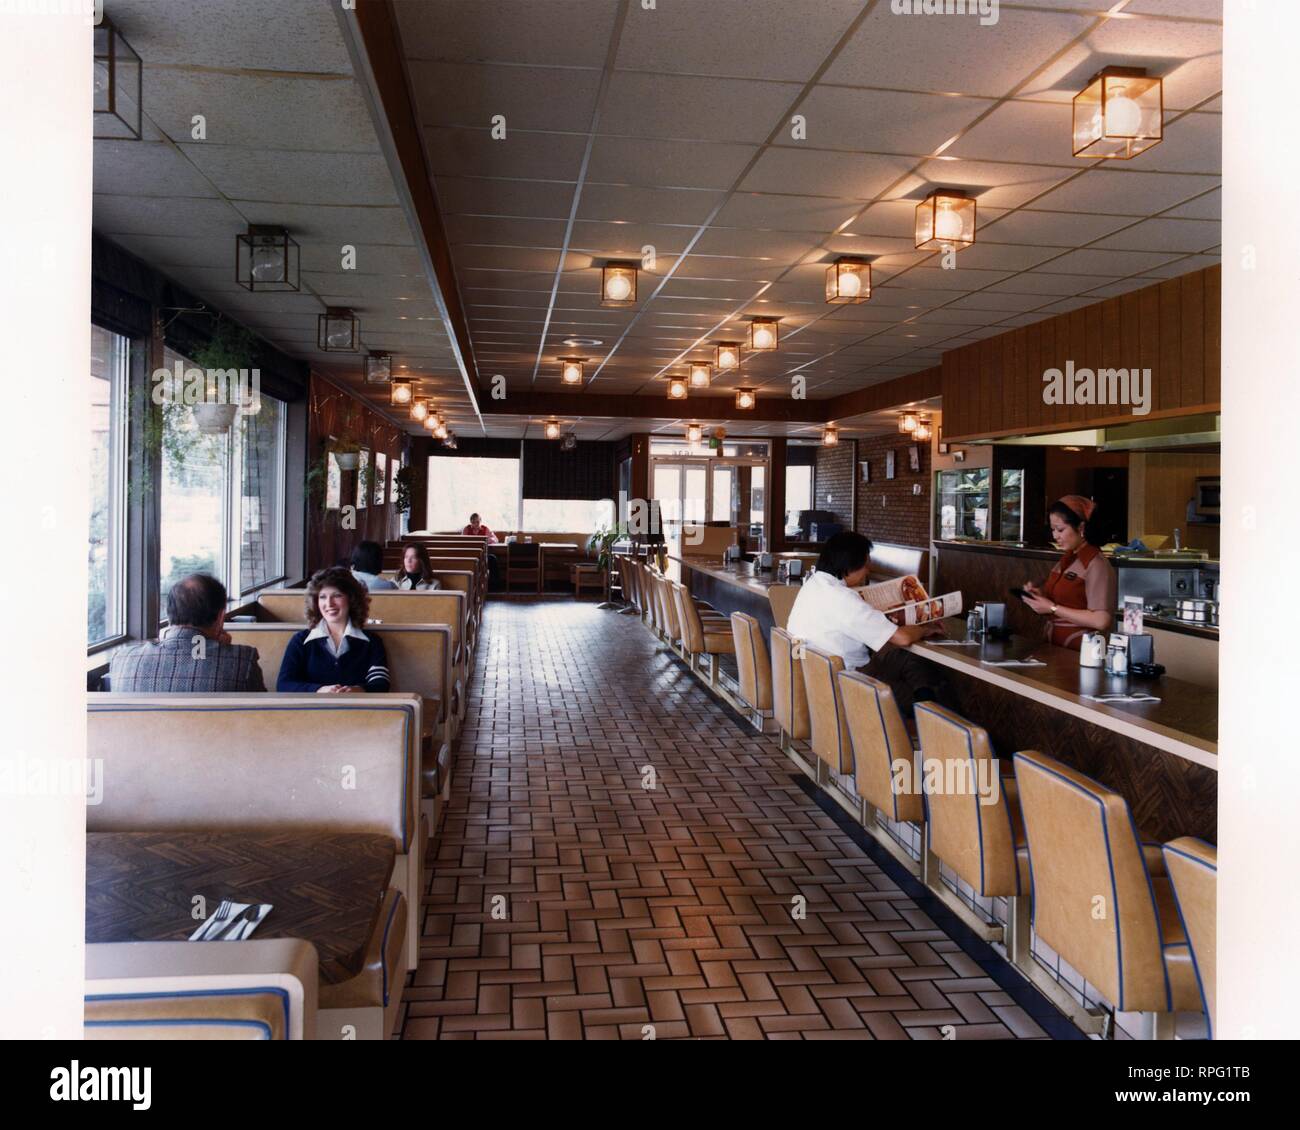 Interior view of customers and staff inside a Jolly Tiger Restaurant equipped with energy efficient lighting, 1980. Image courtesy US Department of Energy. () Stock Photo